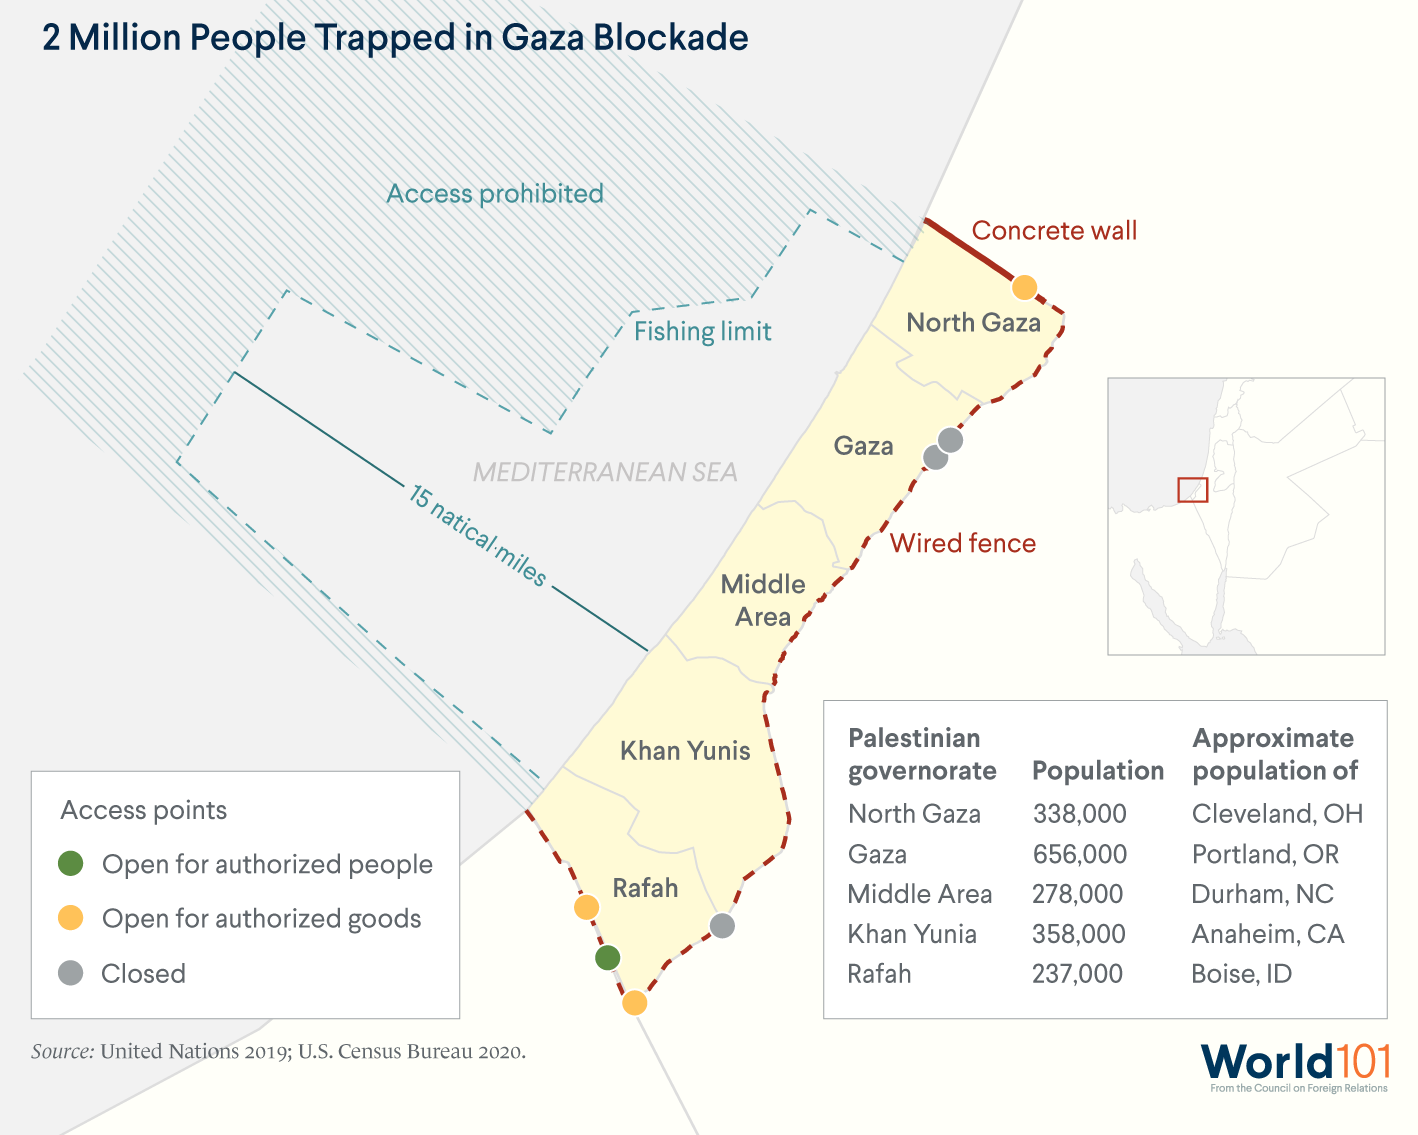 A map showing the Gaza blockade. Israel and Egypt, Gaza’s two neighbors, imposed a near-total land and sea blockade in 2007. Sources: United Nations 2019; Census Bureau 2020. For more info contact us at world101@cfr.org.